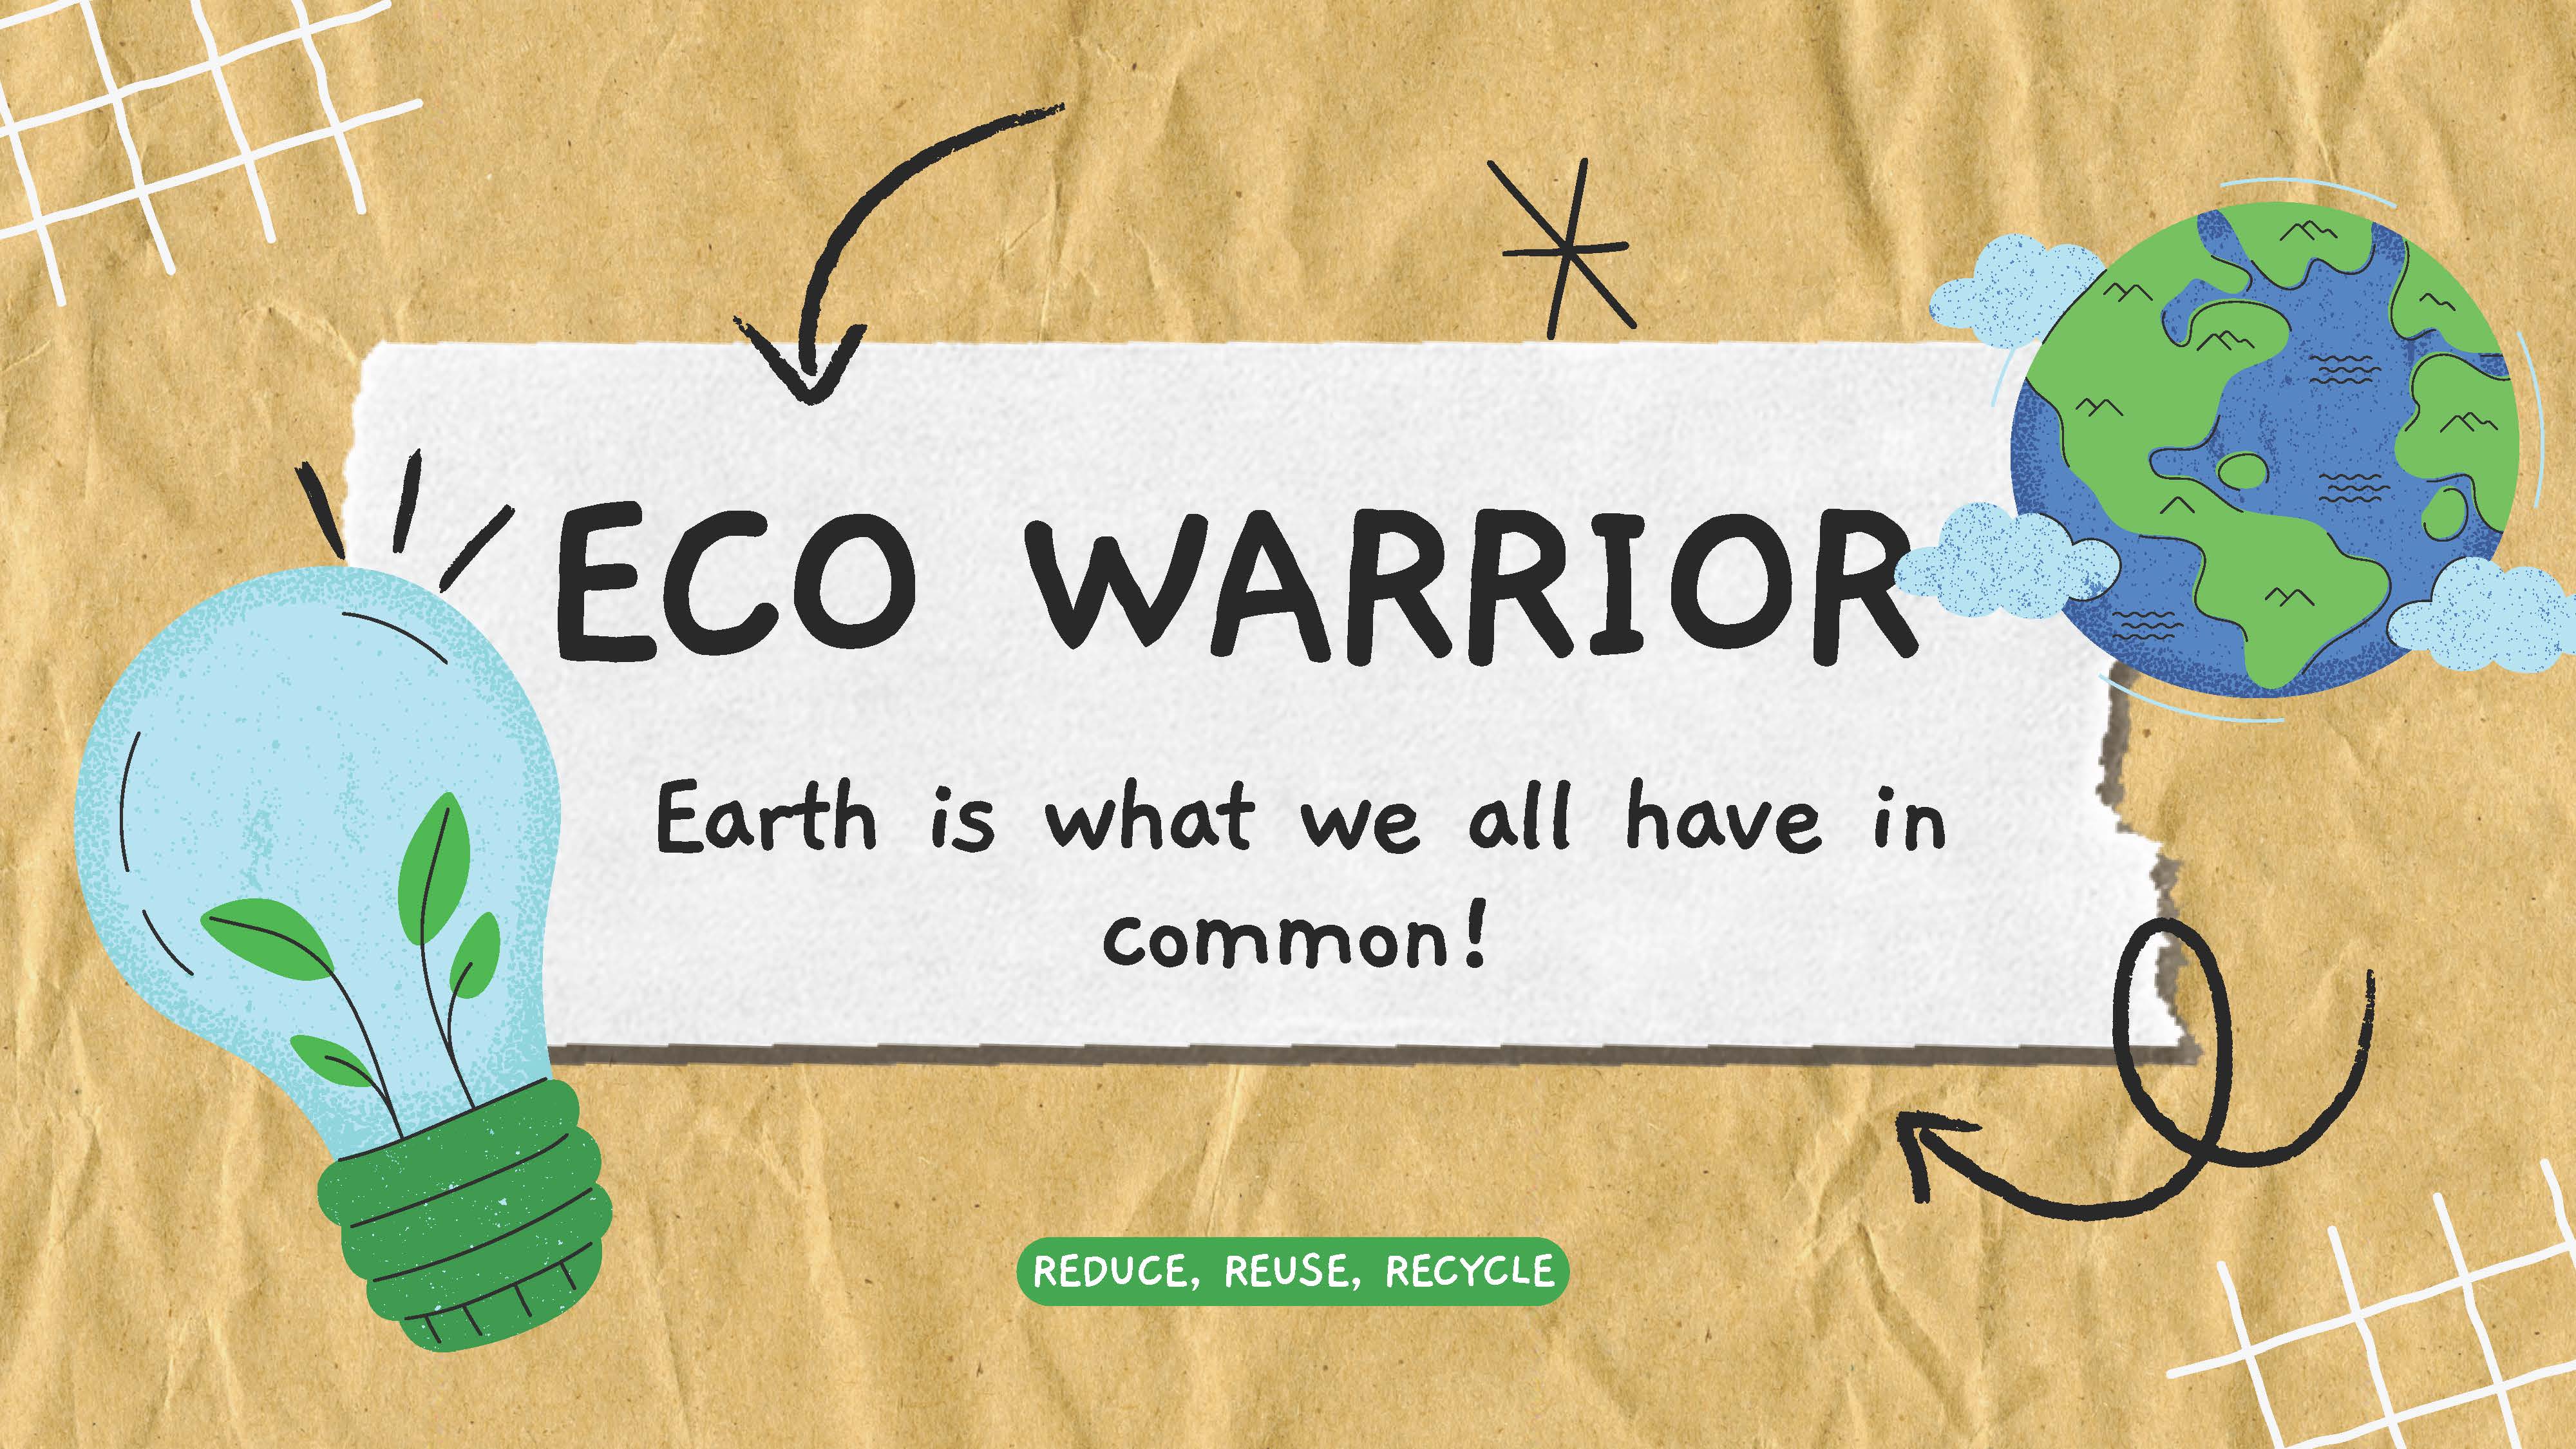 Eco Warrior - Earth is what we have in common!